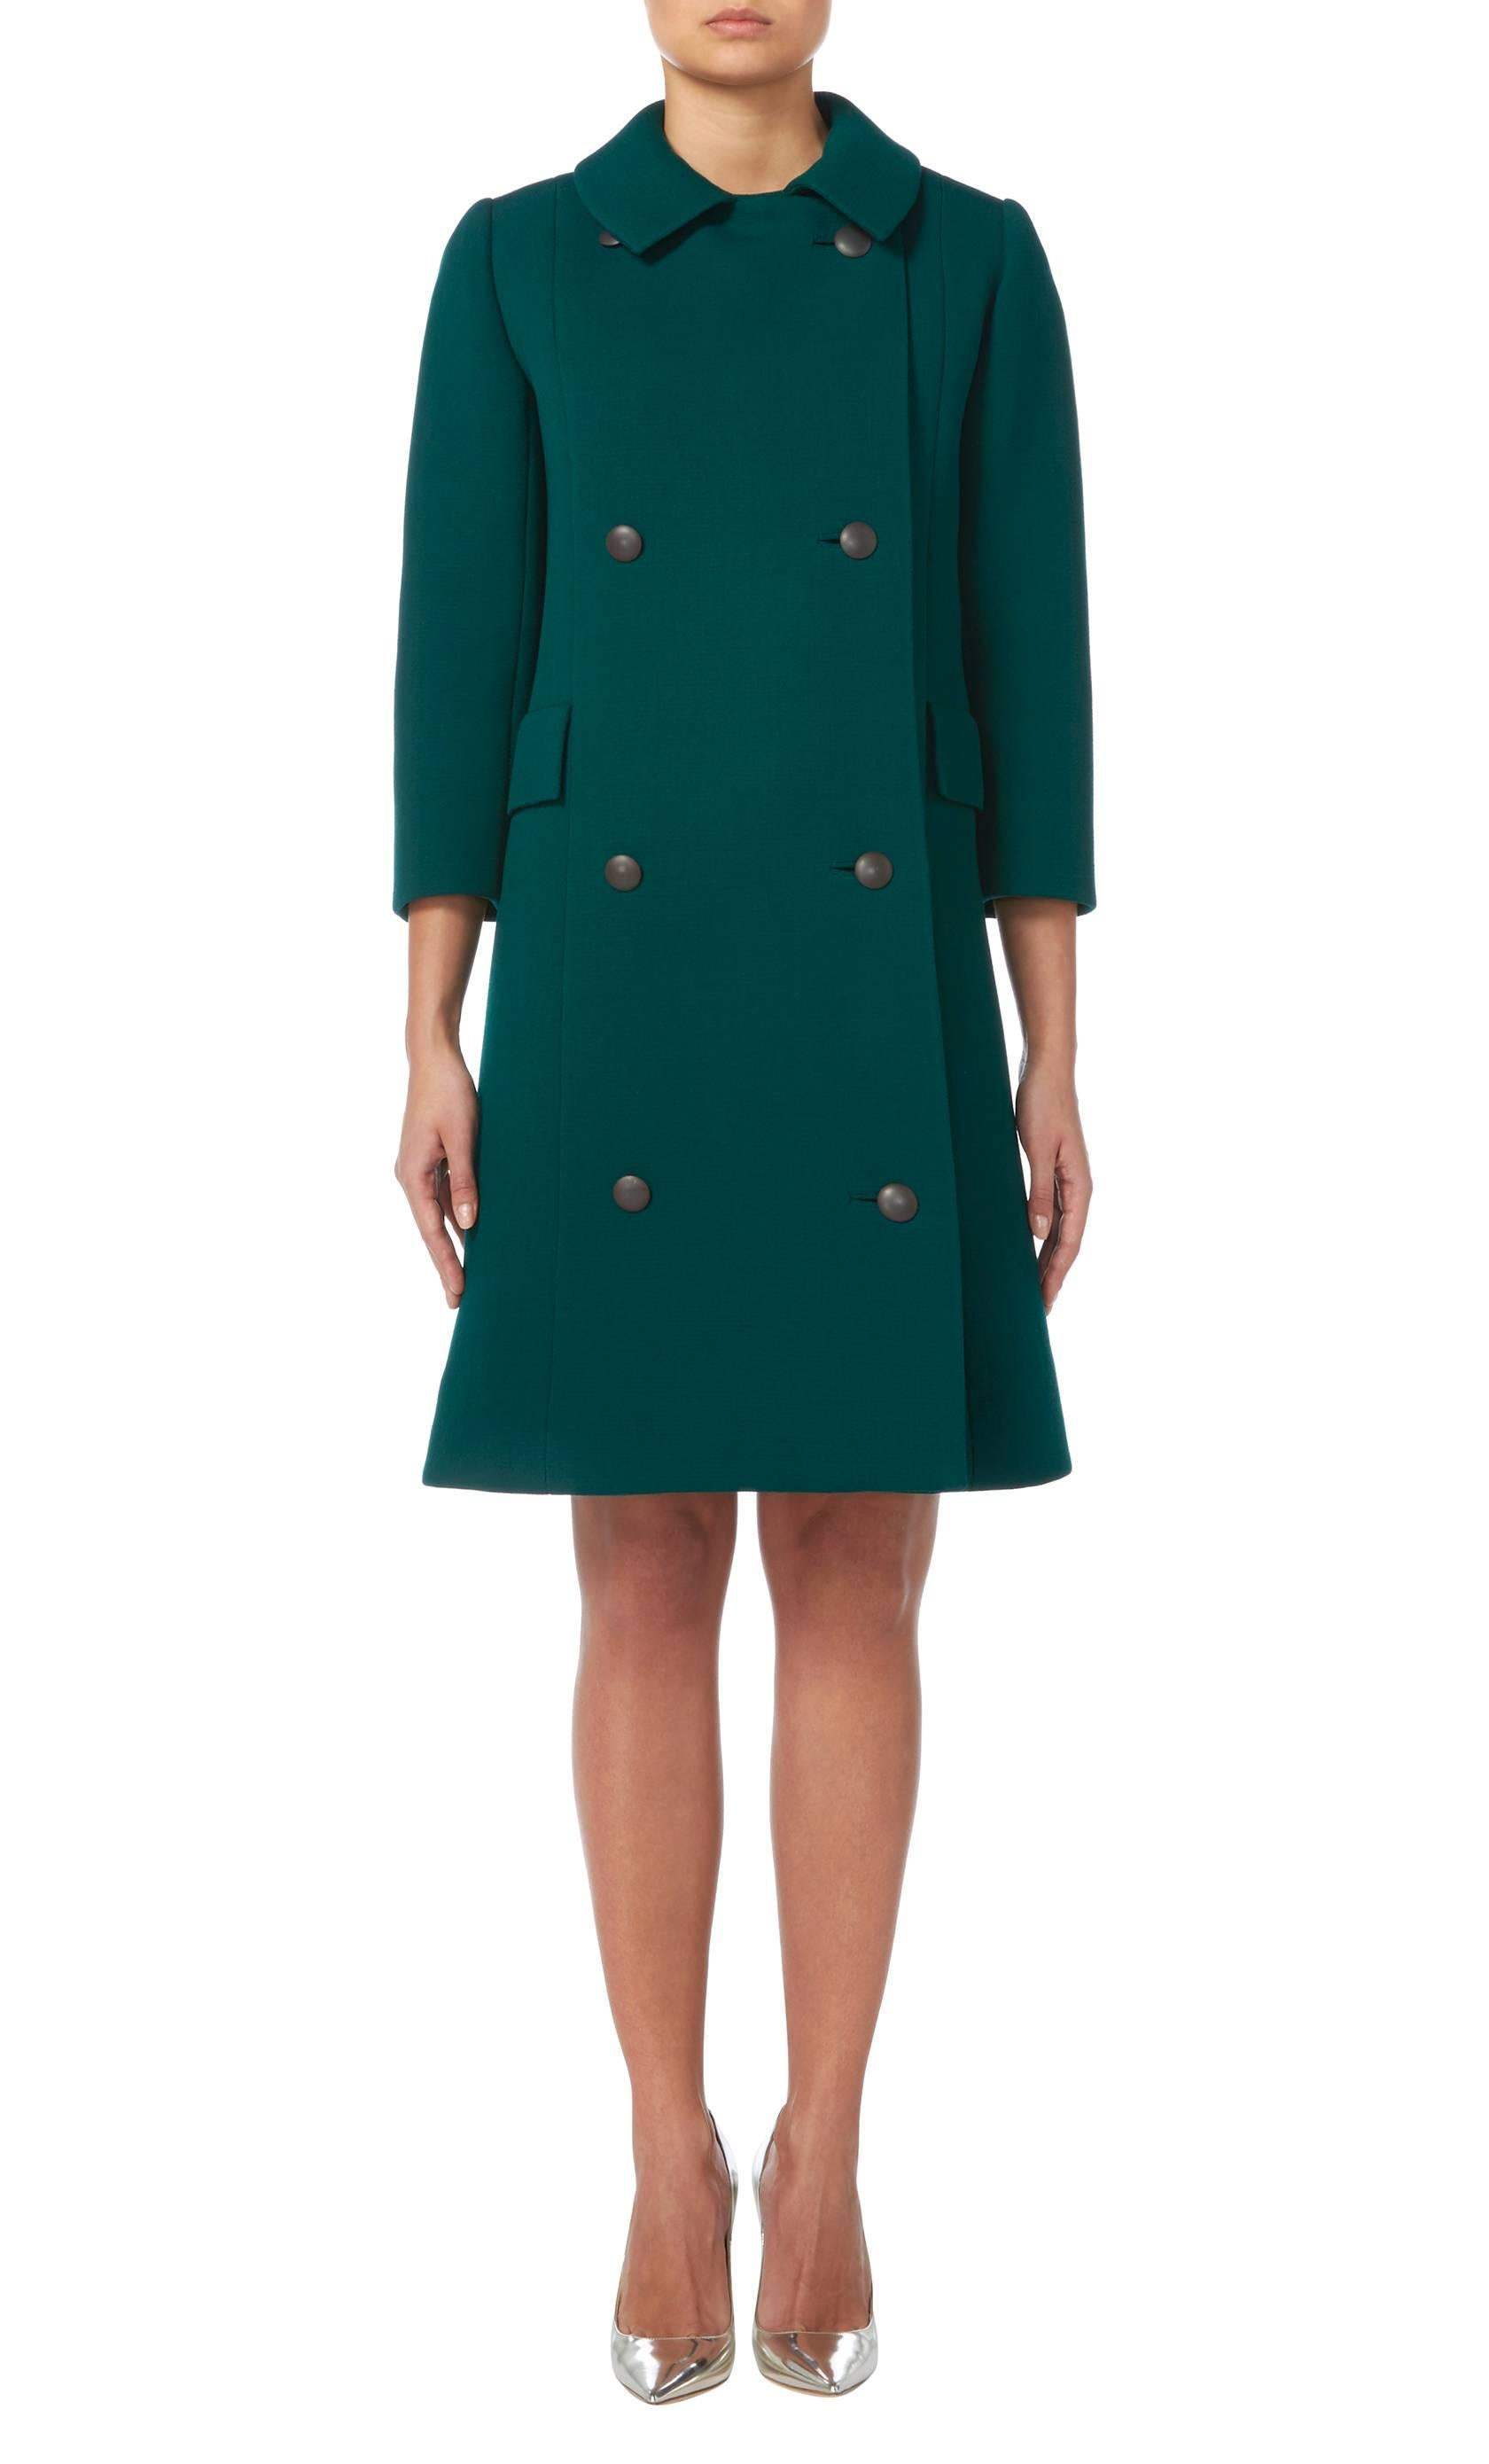 Comprising of a sleeveless dress and double-breasted coat
Constructed in green wool
Zip fastening to the rear to the dress and buttons to the front of the coat
Excellent condition with the original label, belt, linings and